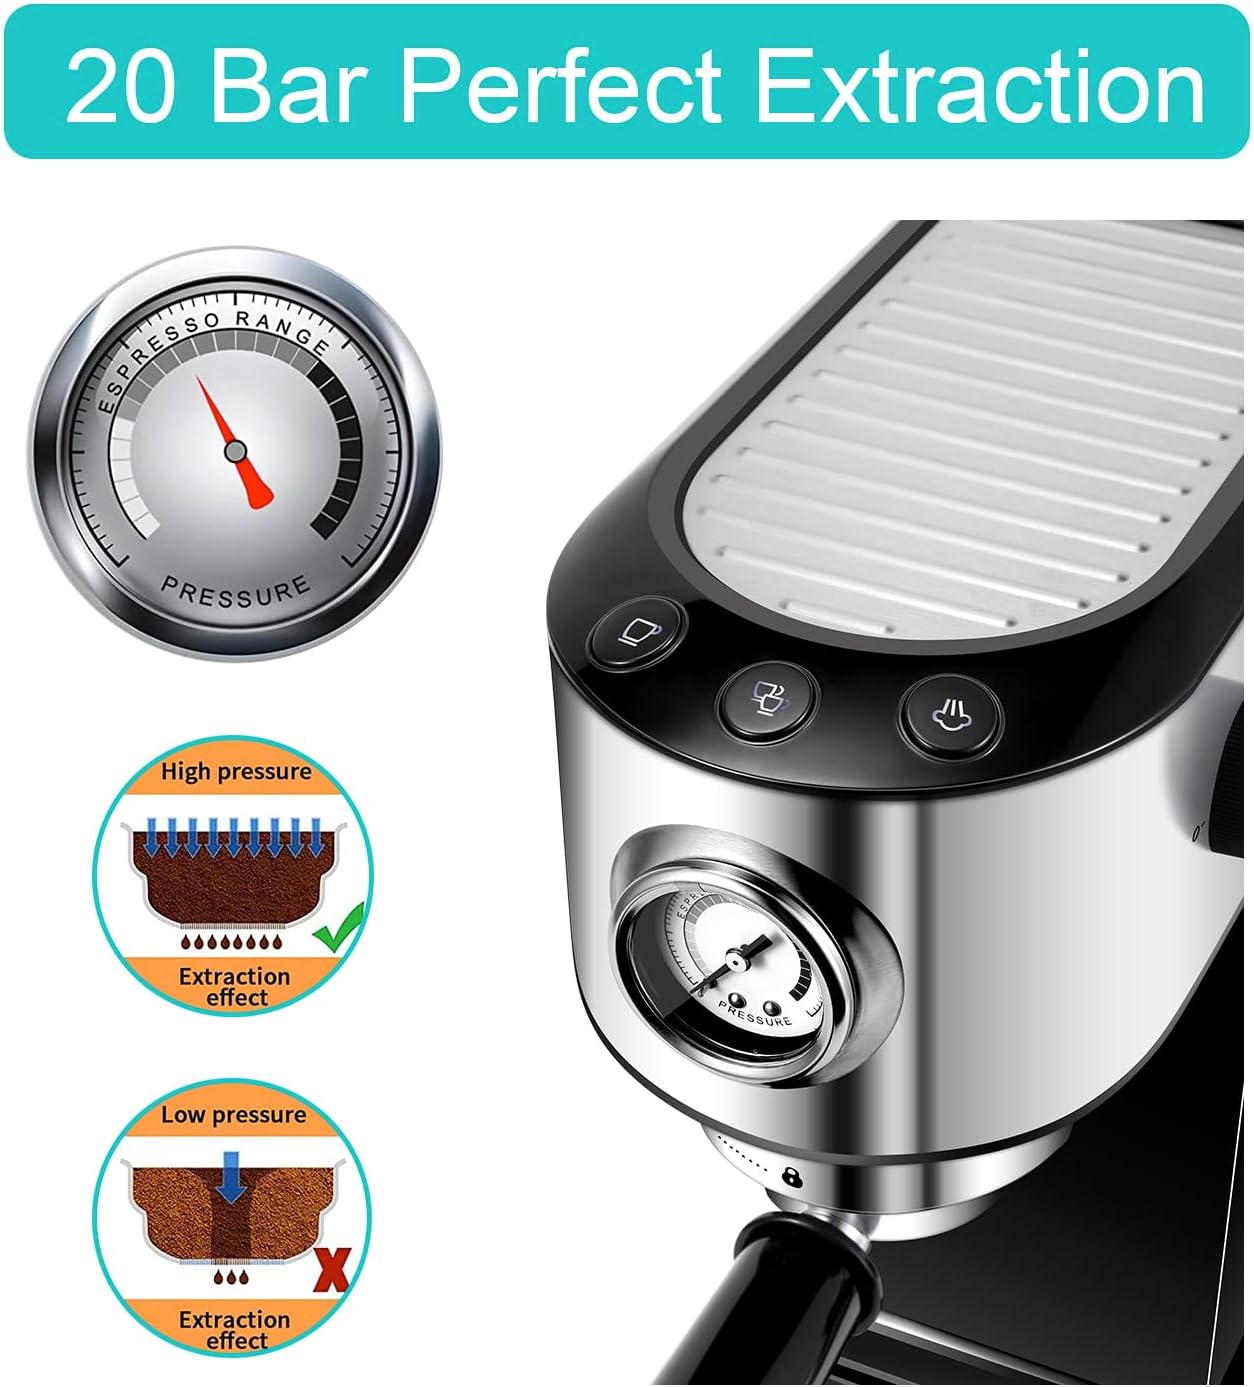 Vaundra Espresso machine 20 Bar with Milk Frother Steam Wand, Cappuccino latte Maker, Coffee Machine Easy to Use for Home Barista